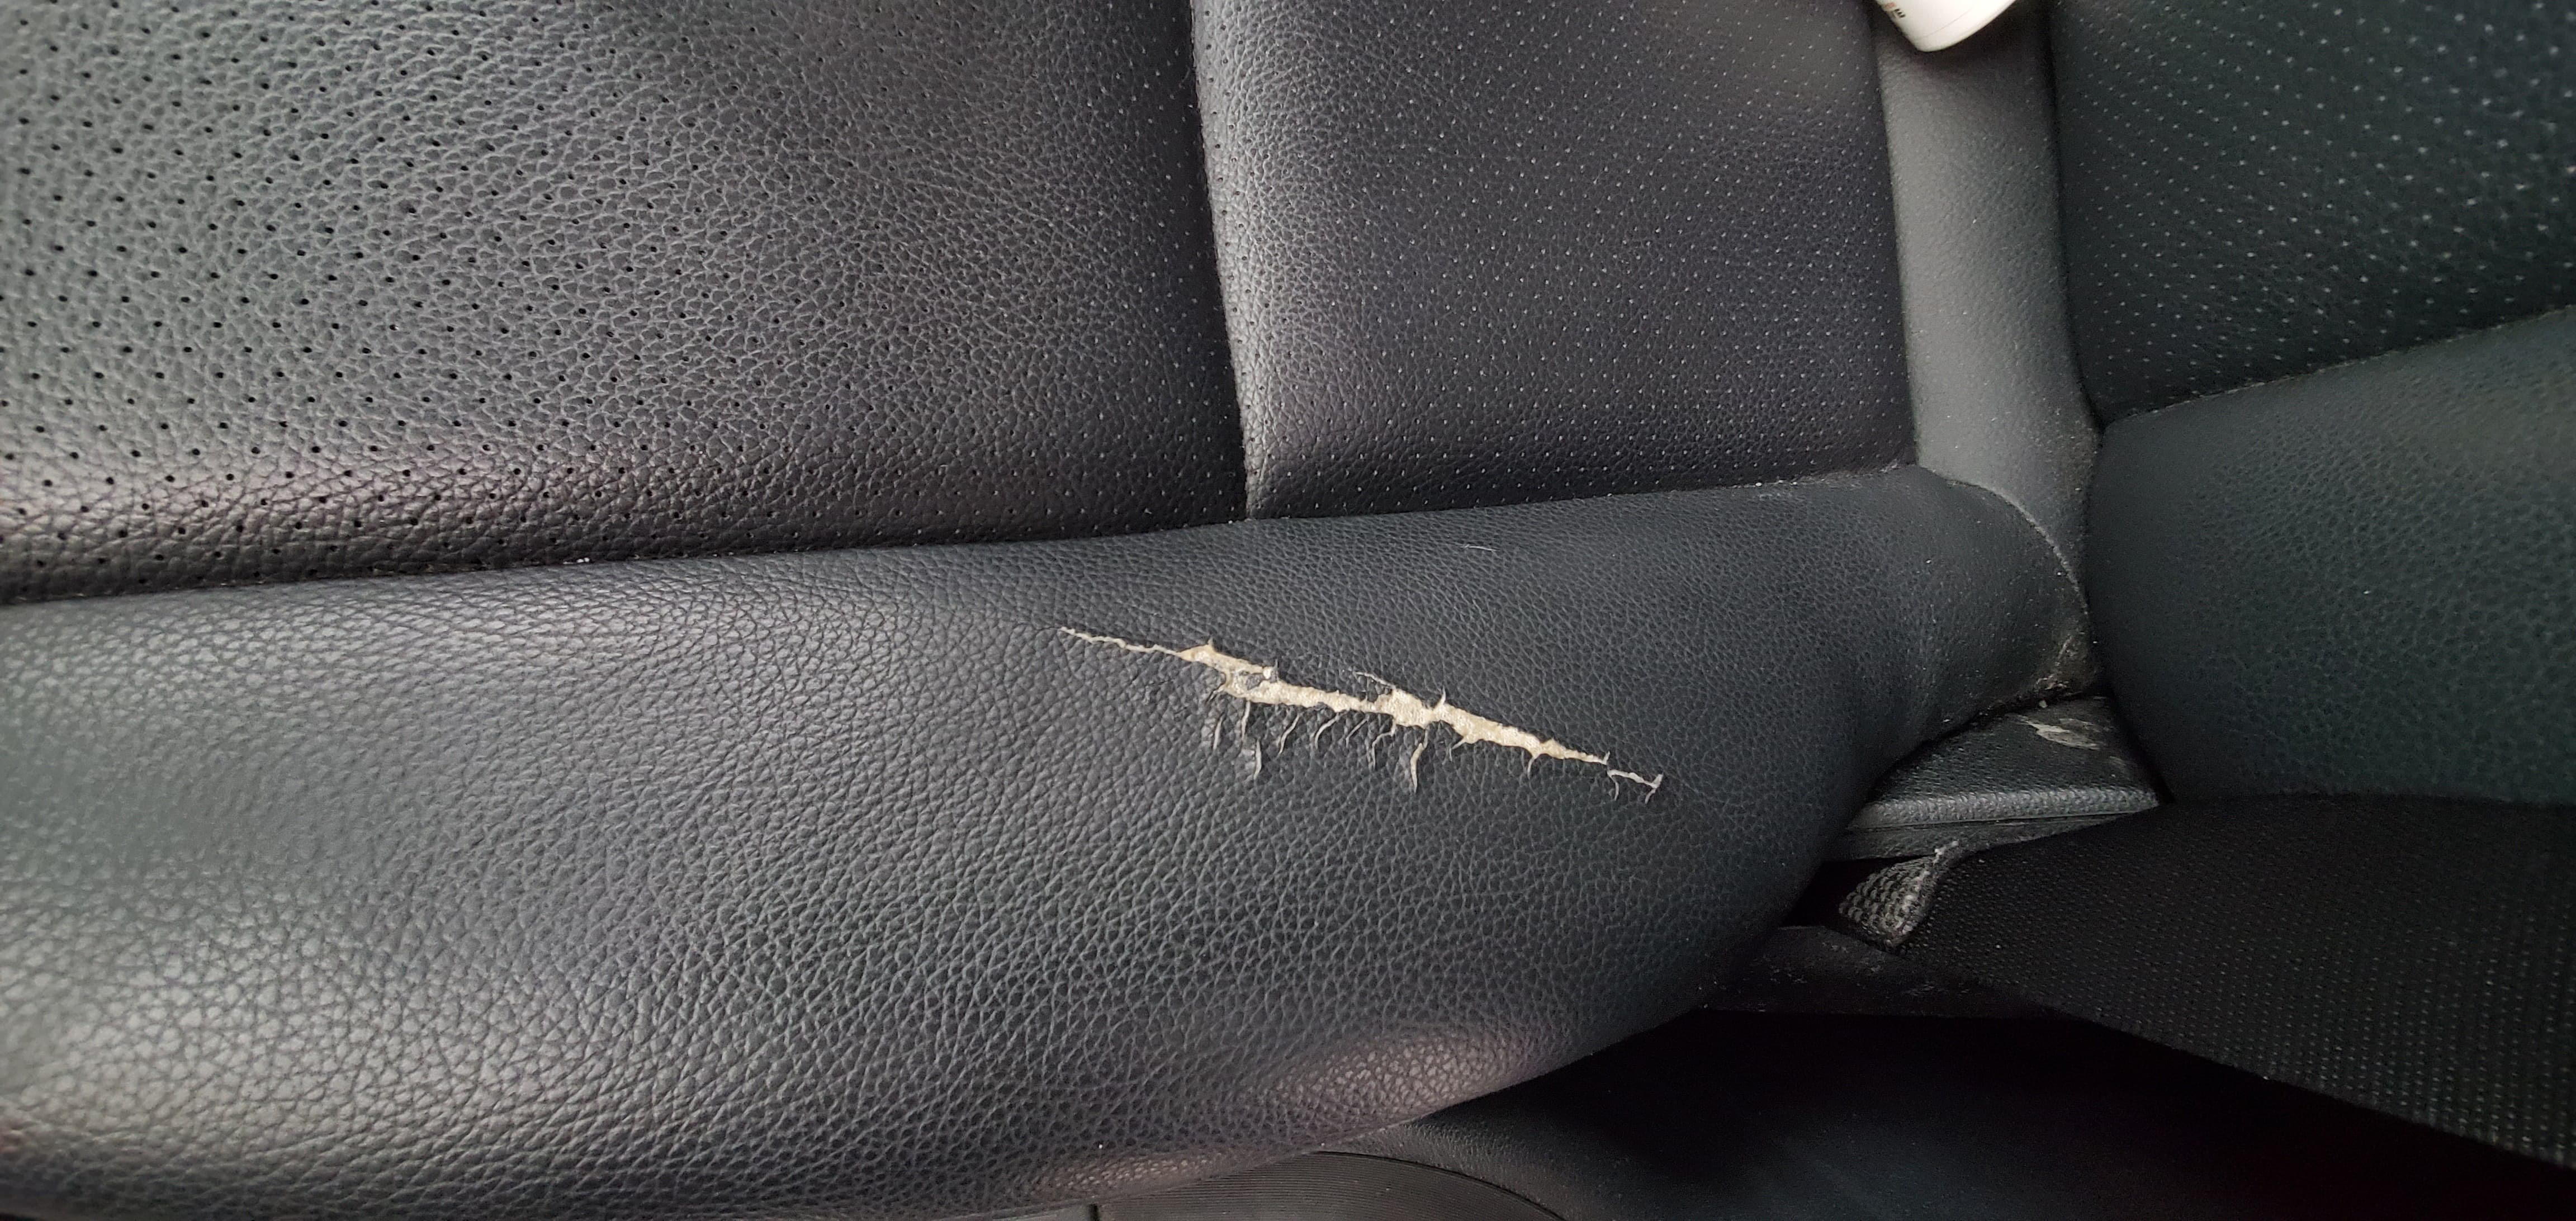 How To Repair A Leather Car Seat - How To Fix Ripped Leather Seat